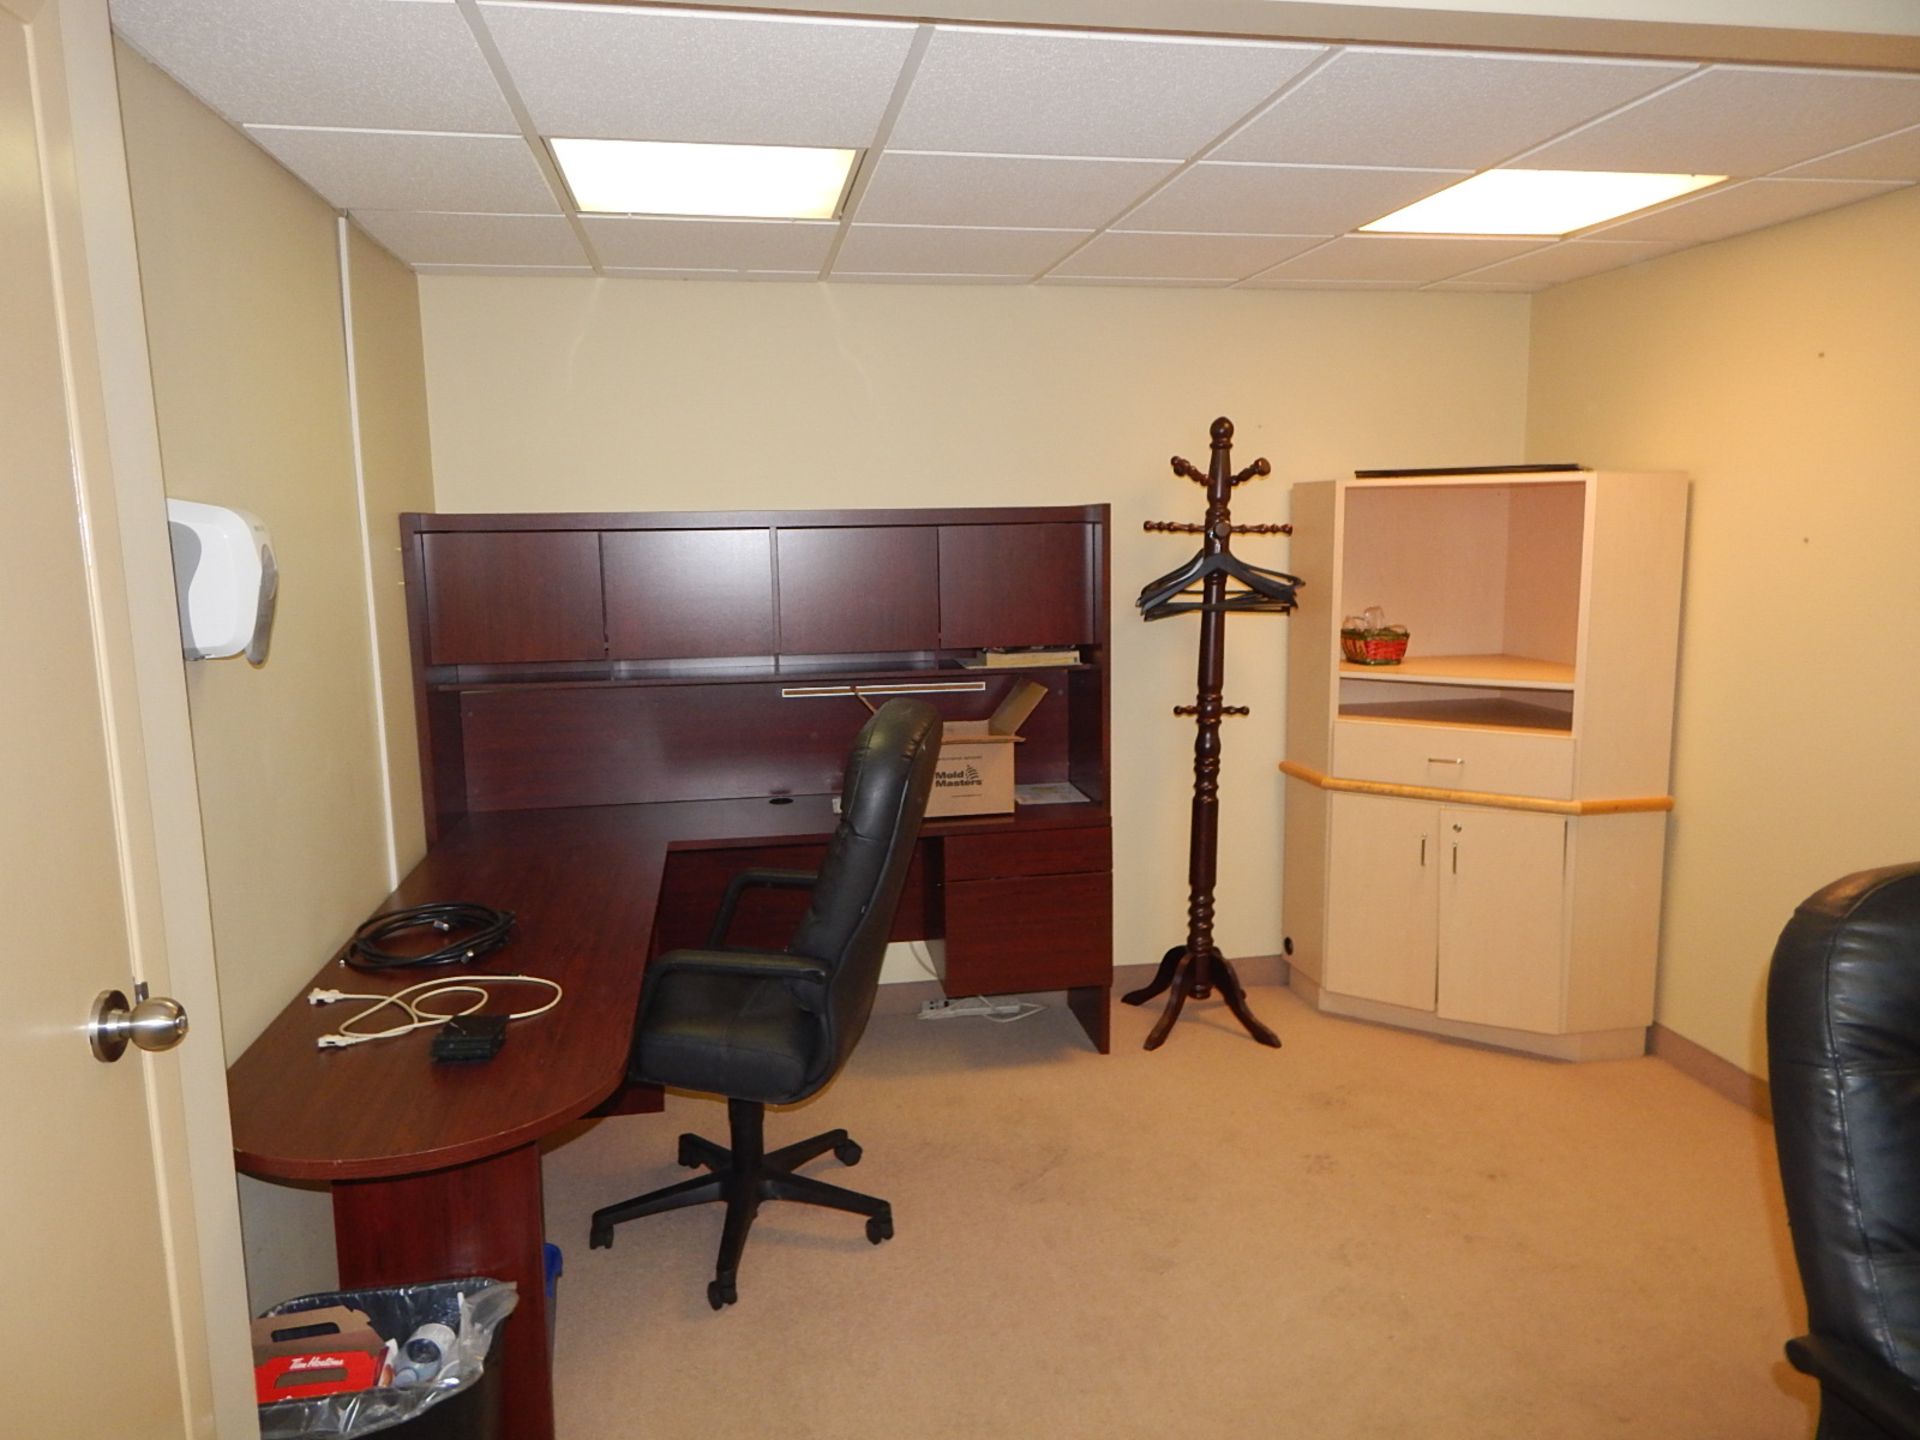 CONTENTS OF BOARDROOM, CONSISTING OF BOARDROOM TABLE, CHAIRS, DESKS AND FURNITURE - Image 3 of 3